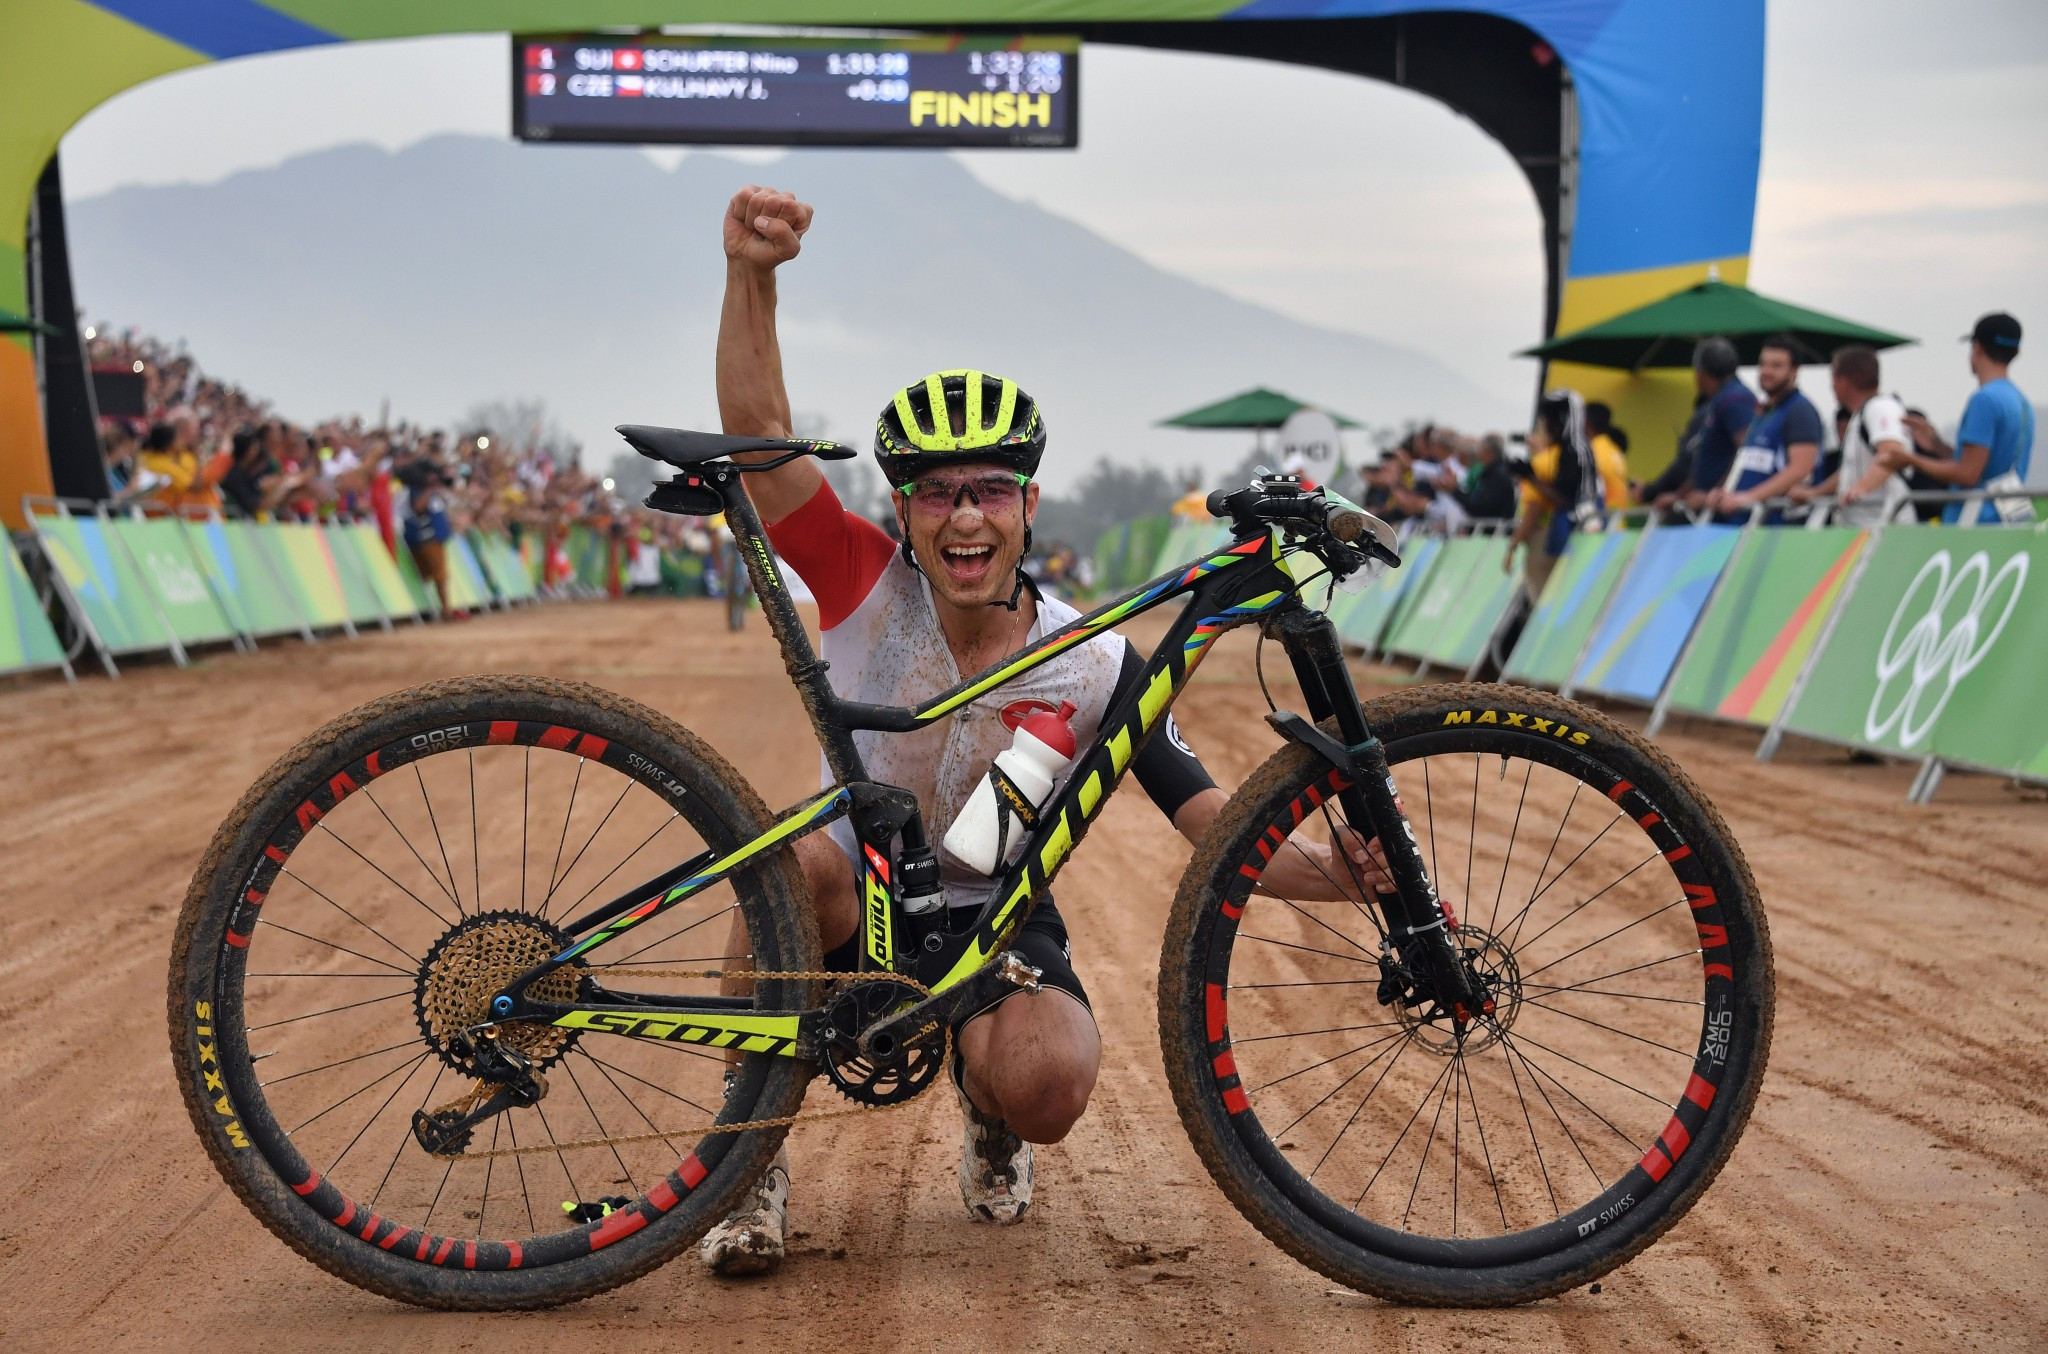 Olympic champion Nino Schurter has dominated the World Cup circuit so far ©Getty Images